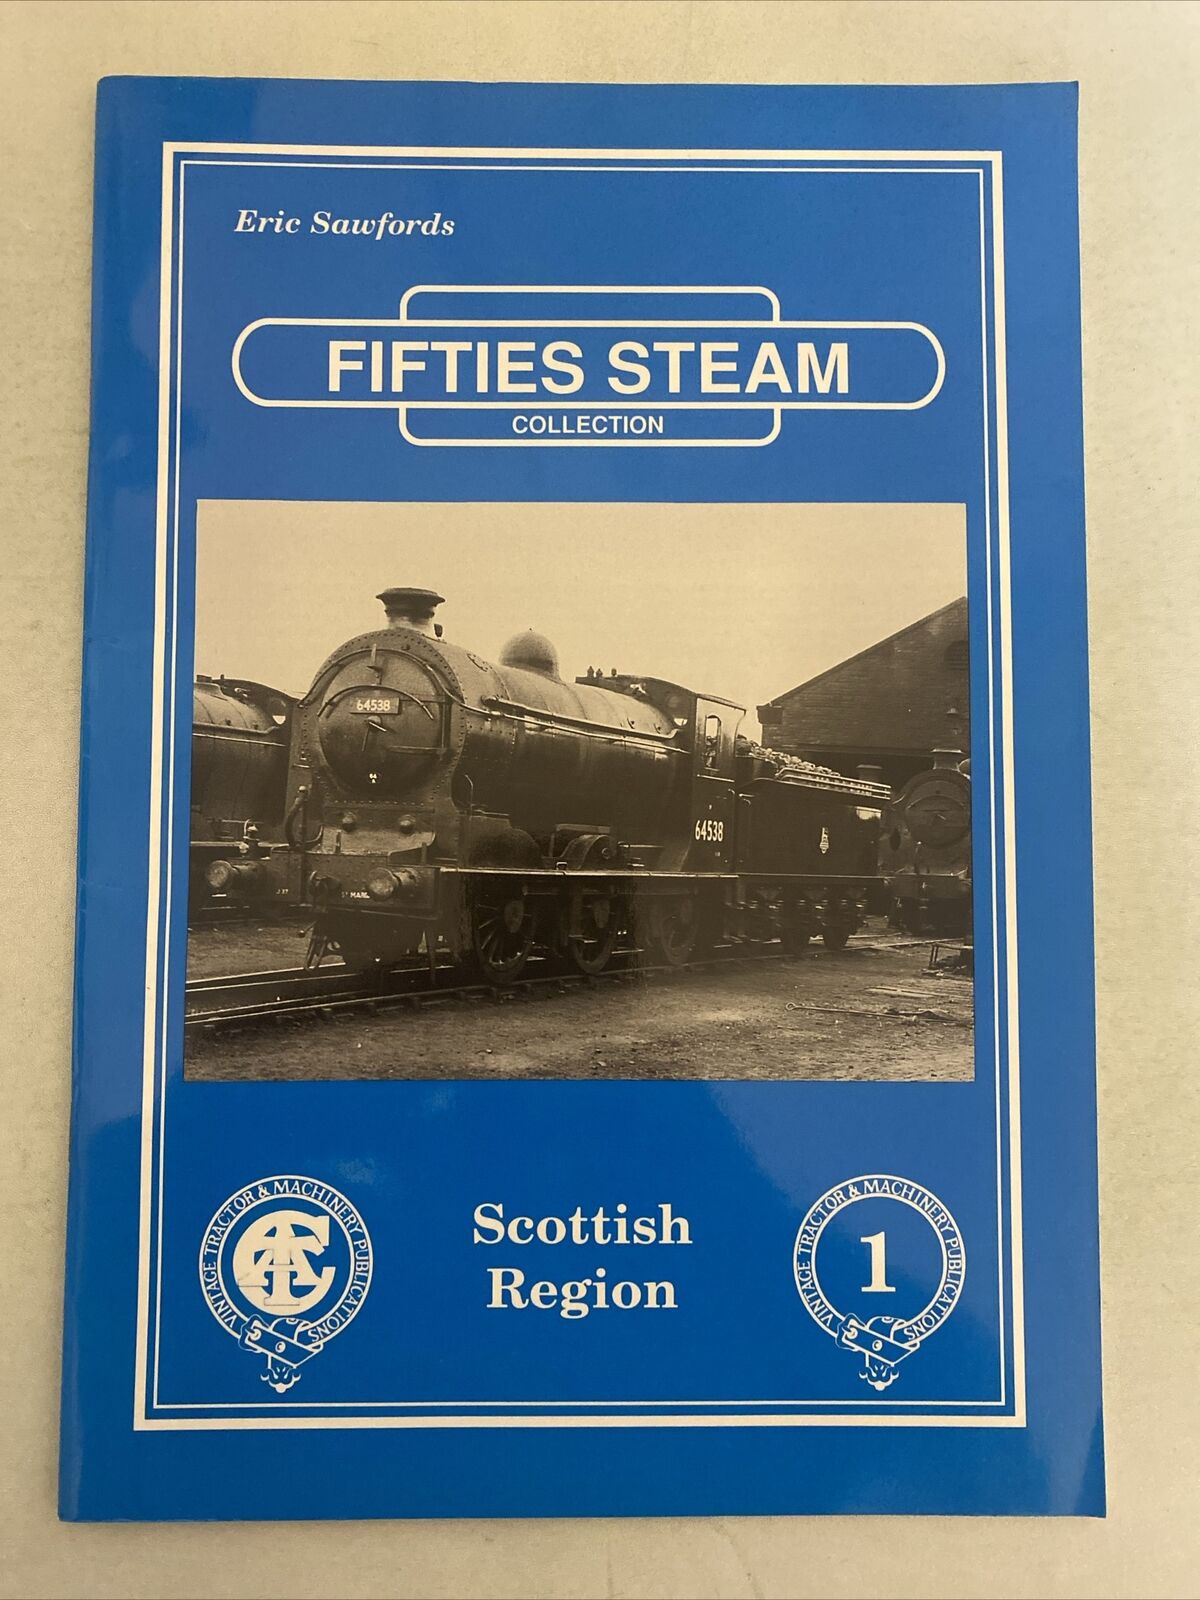 FIFTIES STEAM COLLECTION. SCOTTISH REGION.  ERIC SAWFORDS.   VERY GOOD COND.